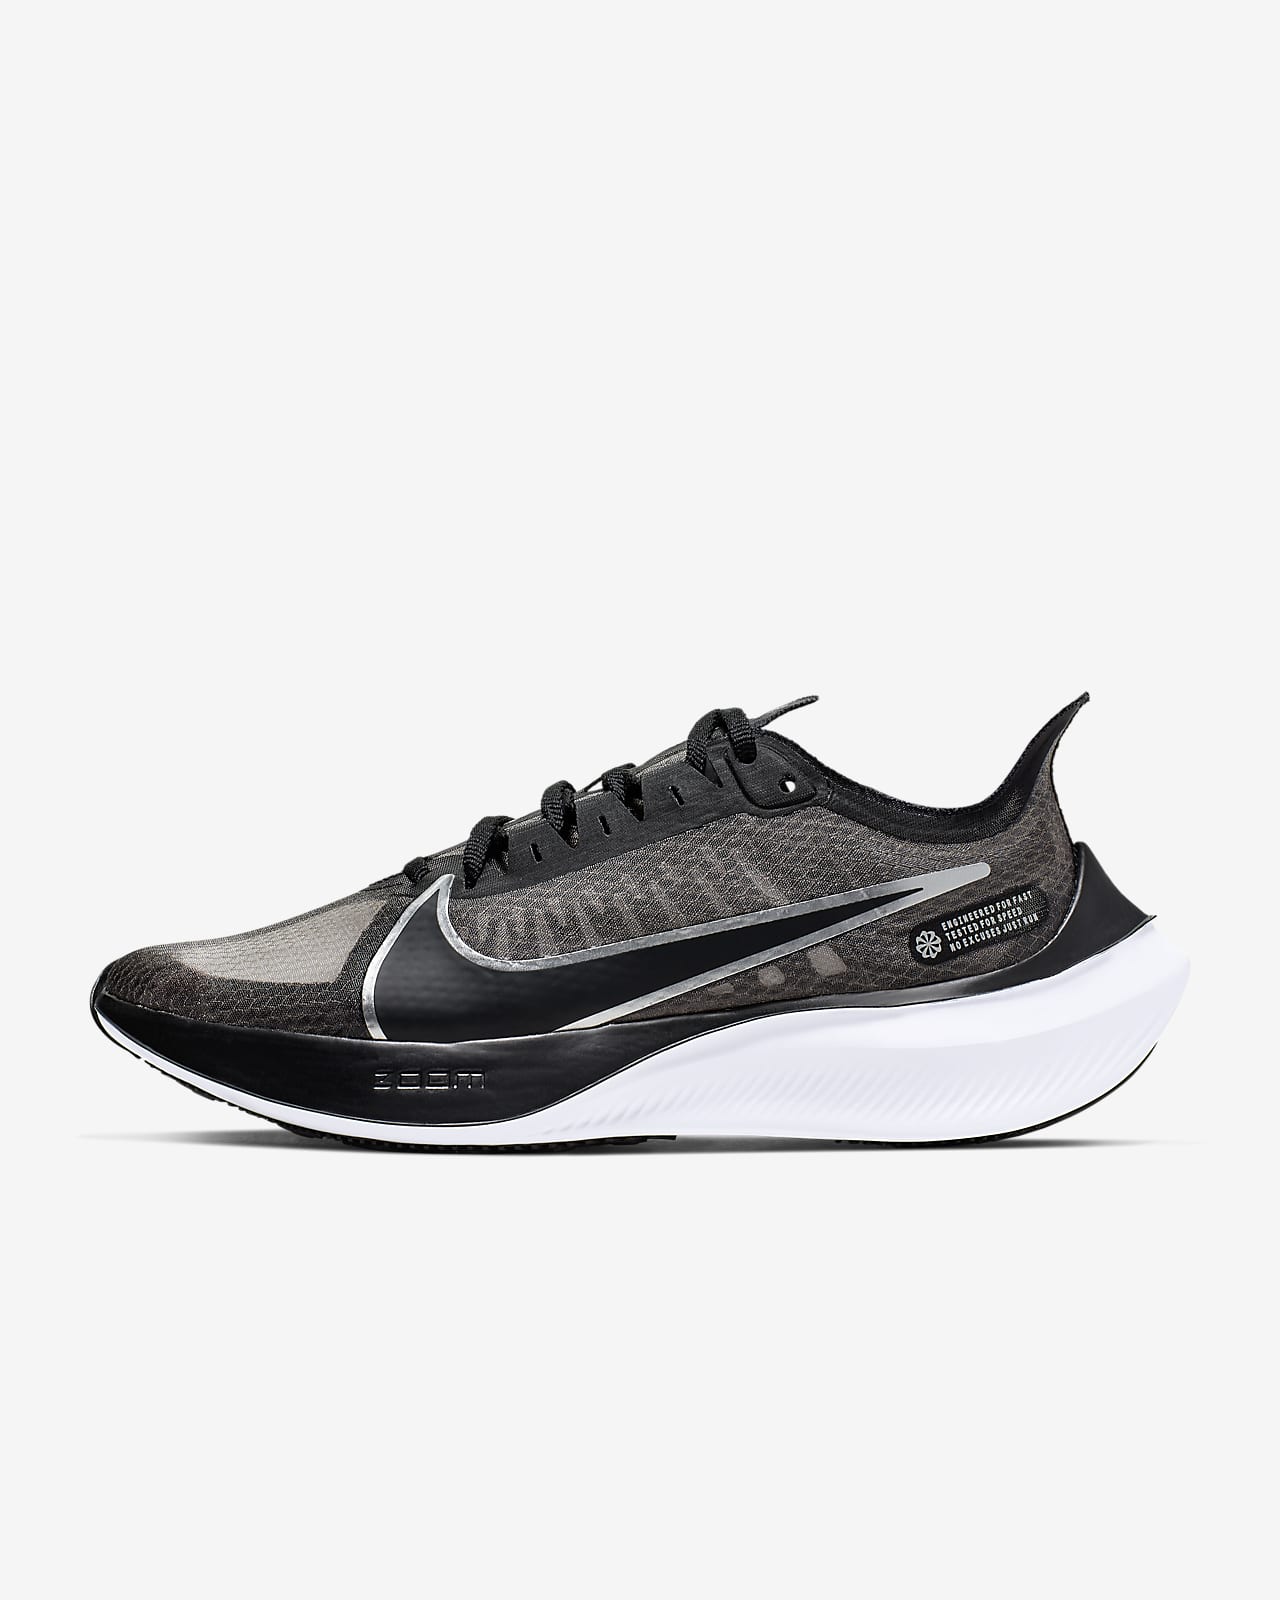 nike gravity zoom review